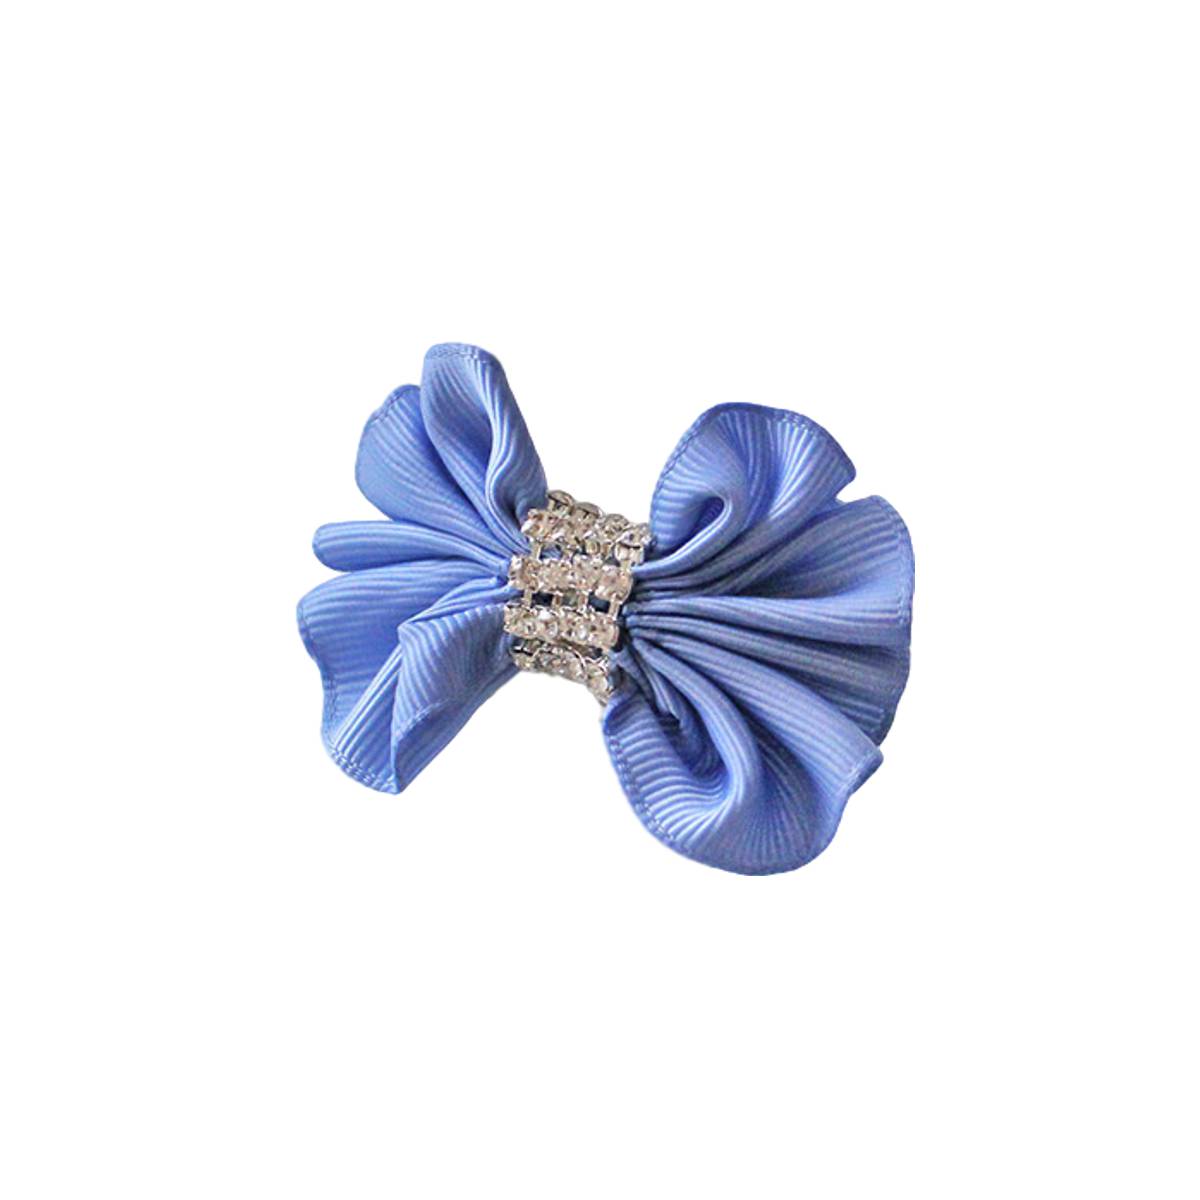 The Muse Dog Hair Clip with Rhinestones in Blue | Pawlicious & Company